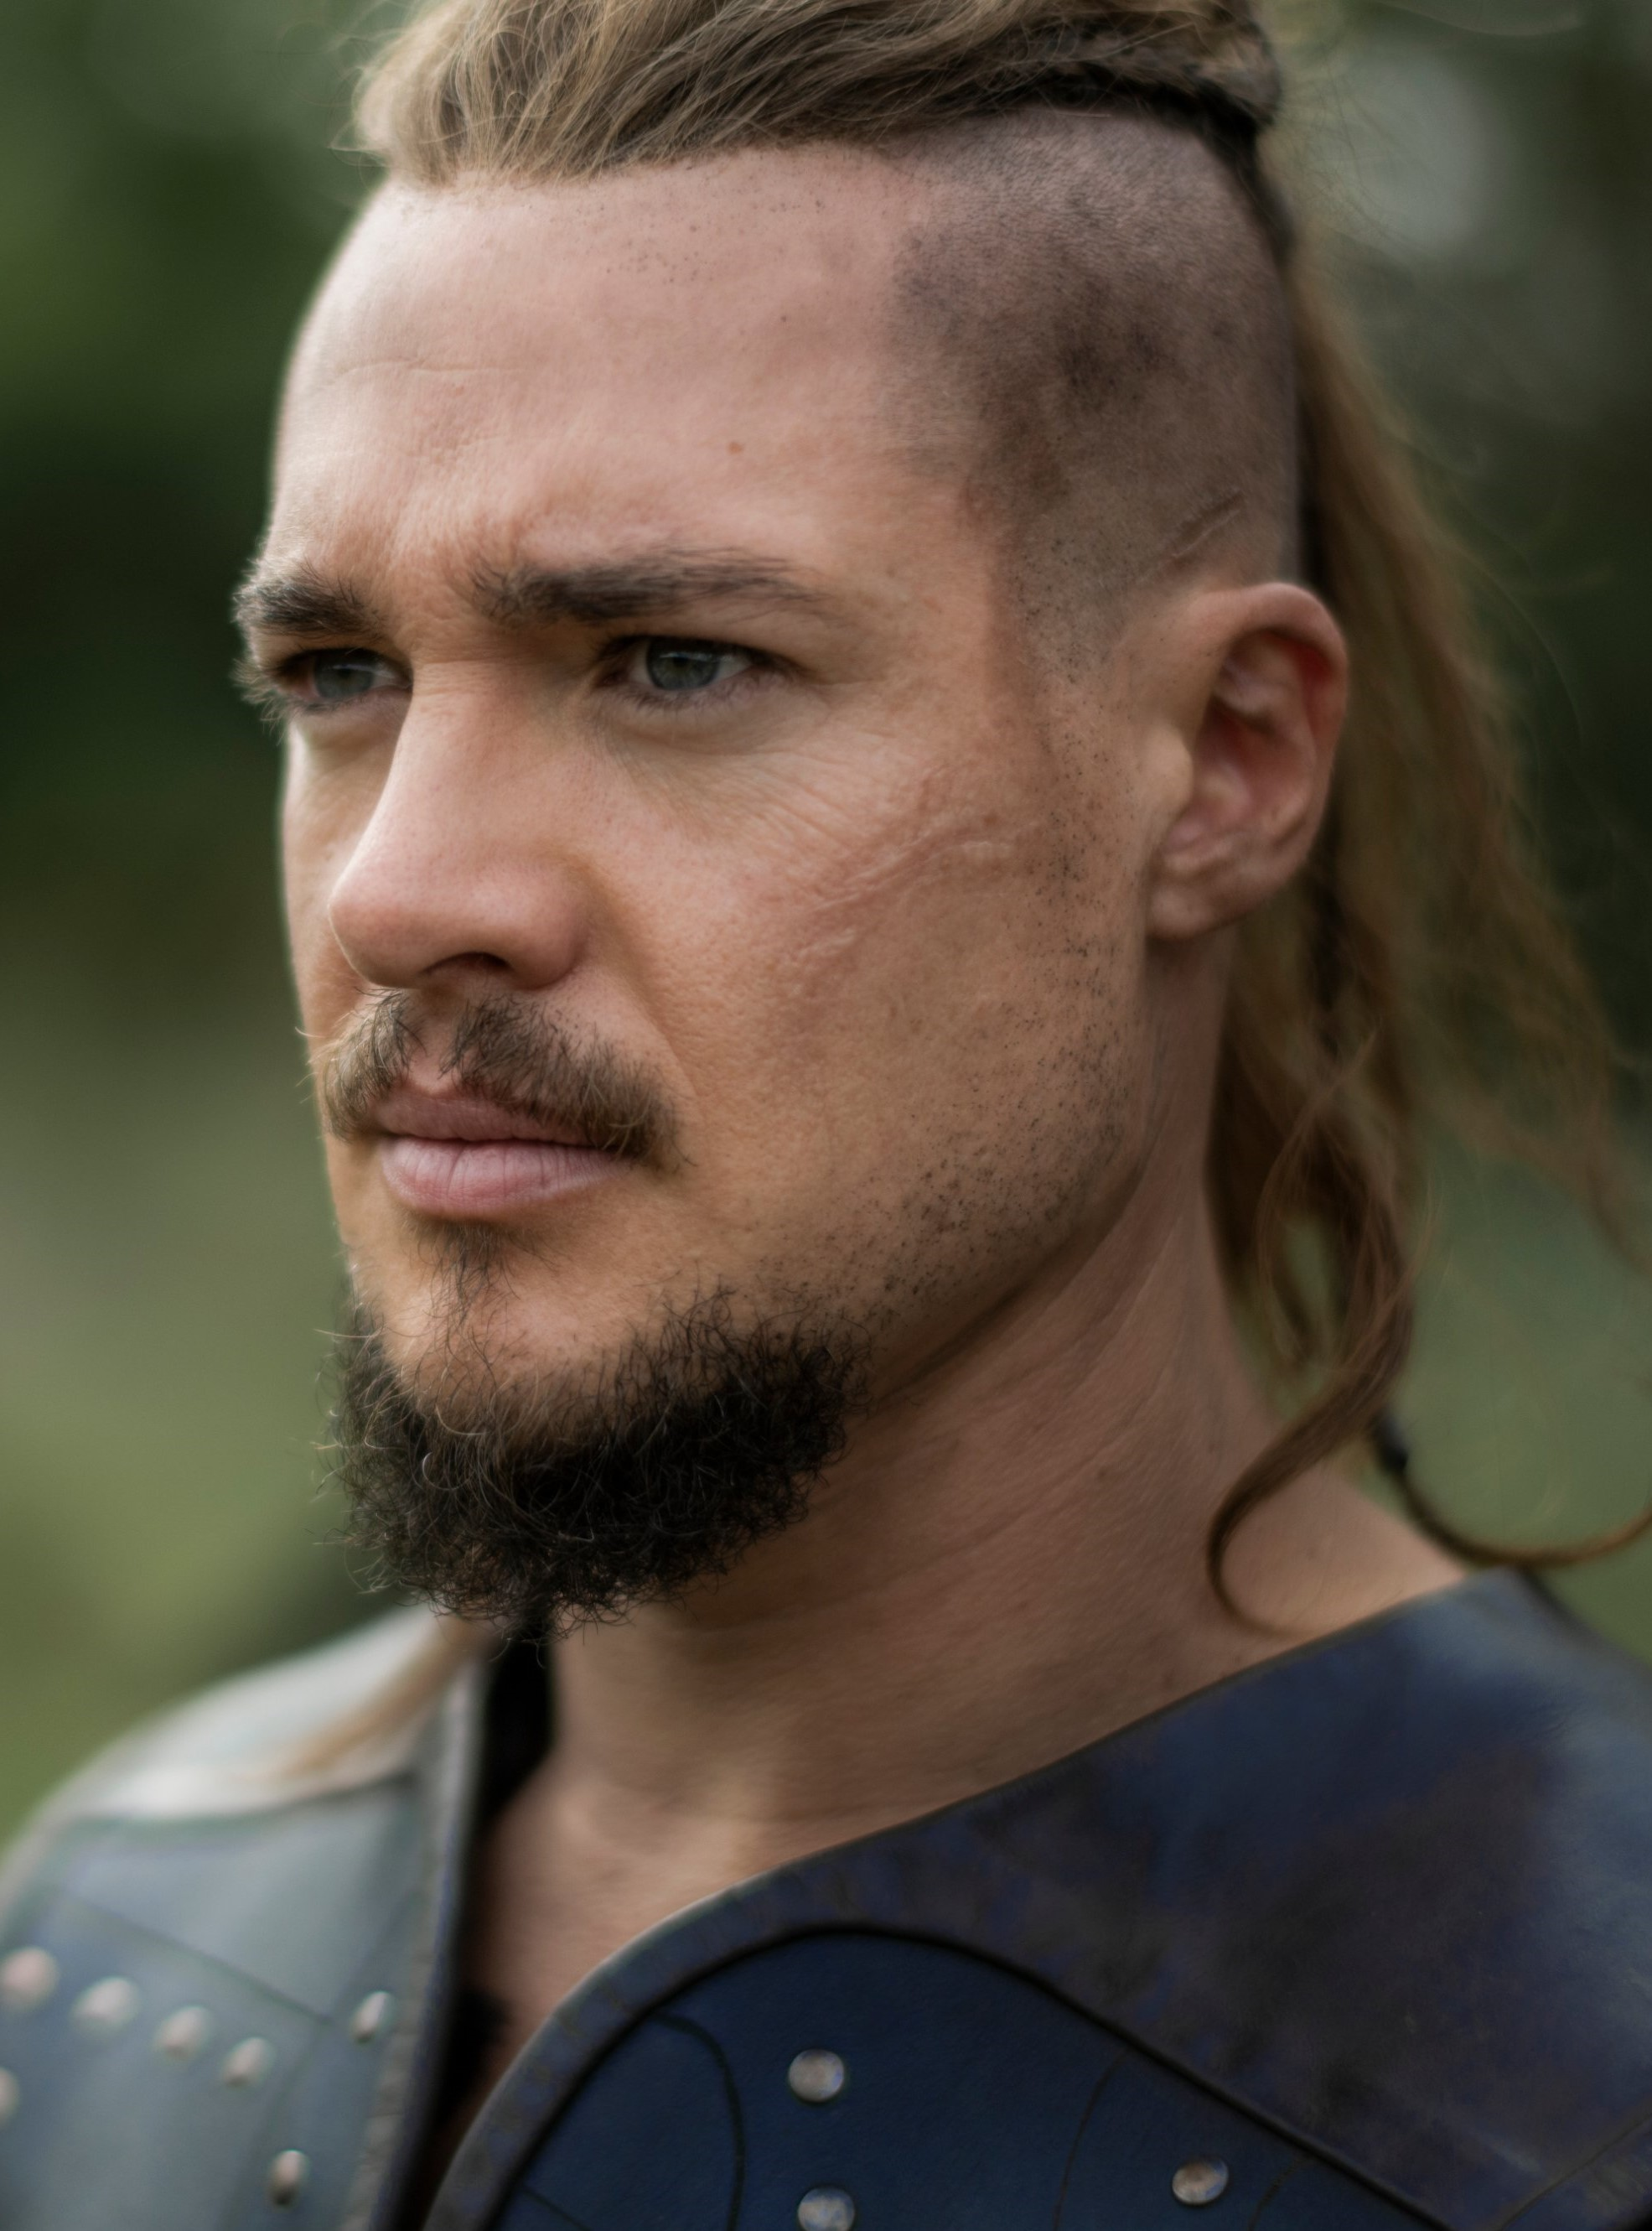 Uhtred the Bold, based on Uhtred from The Last Kingdom : r